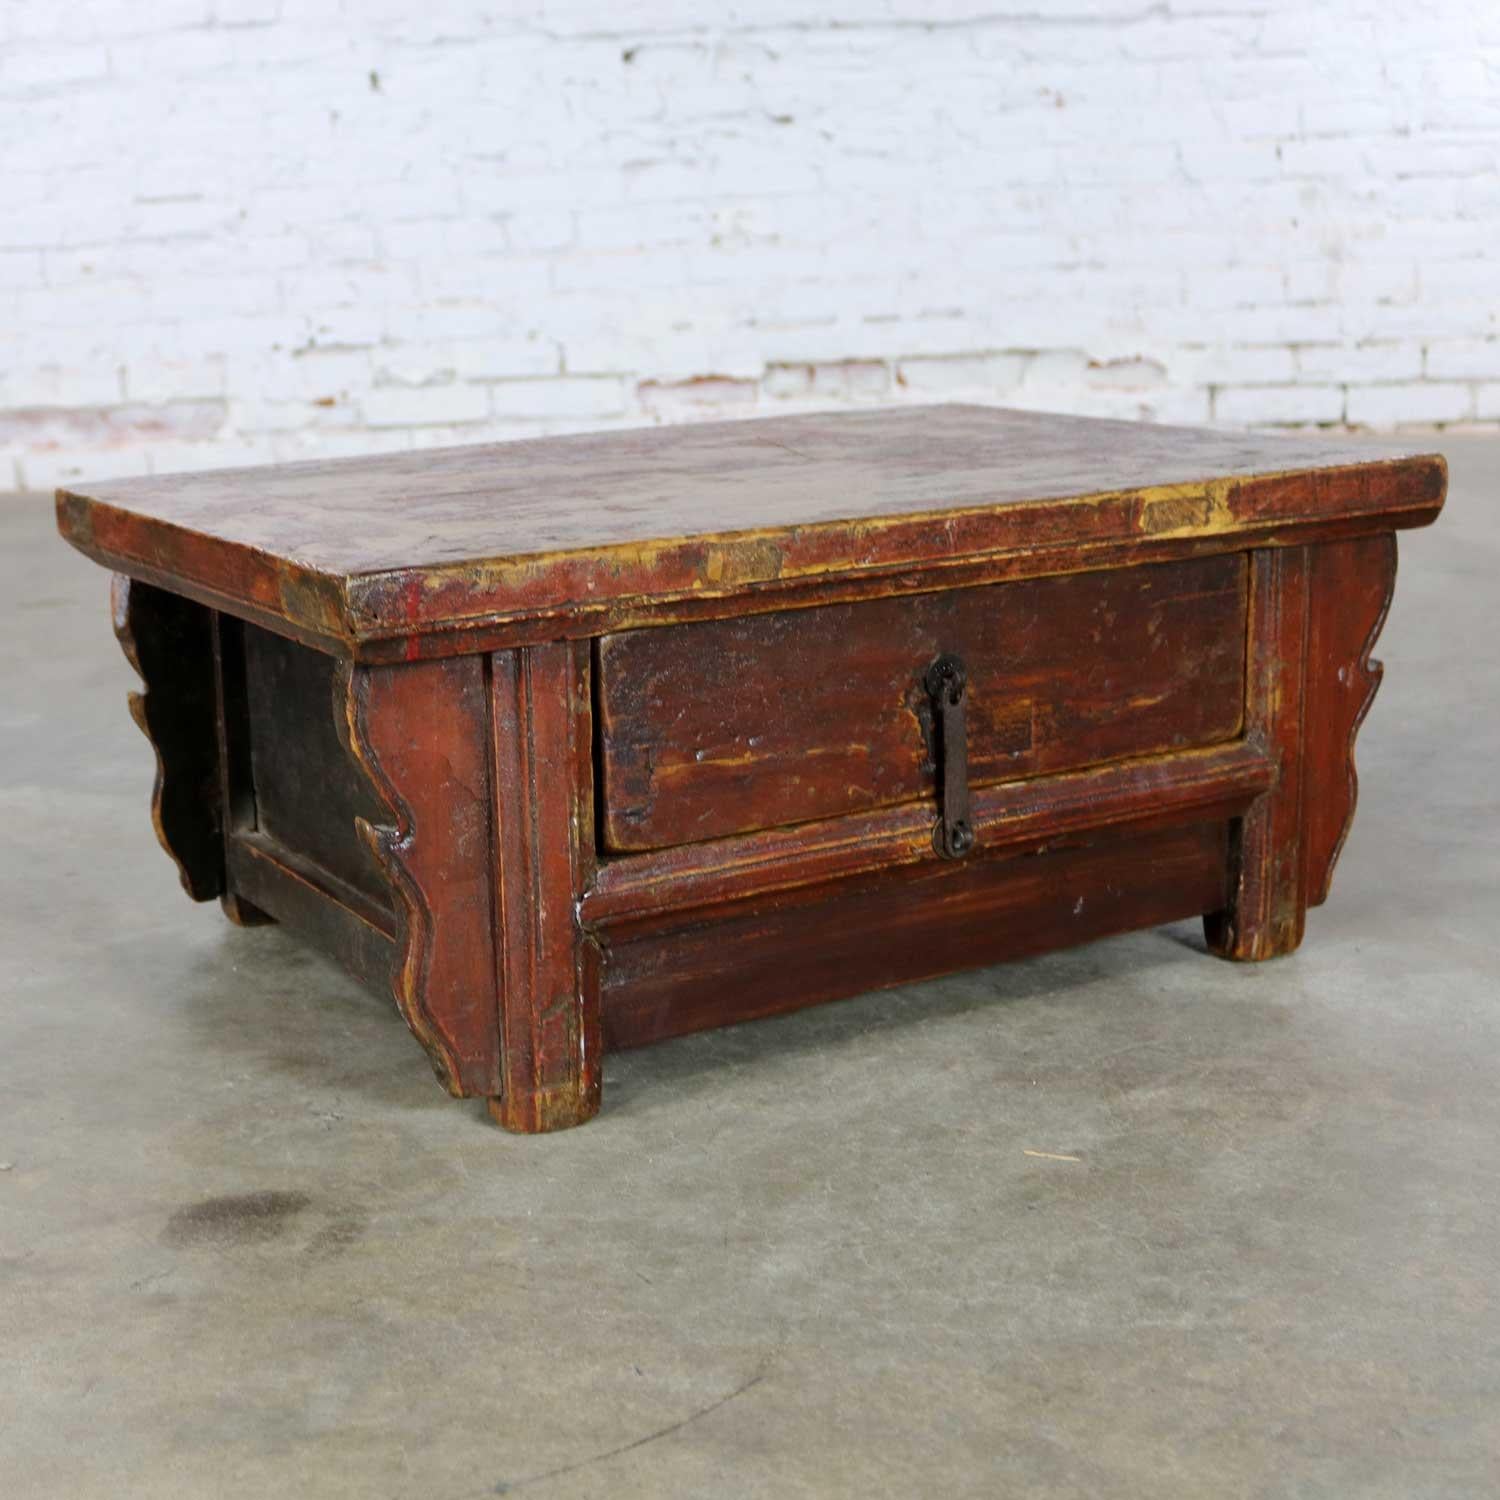 Wood Antique Asian Low Tea or Altar Table with Drawer